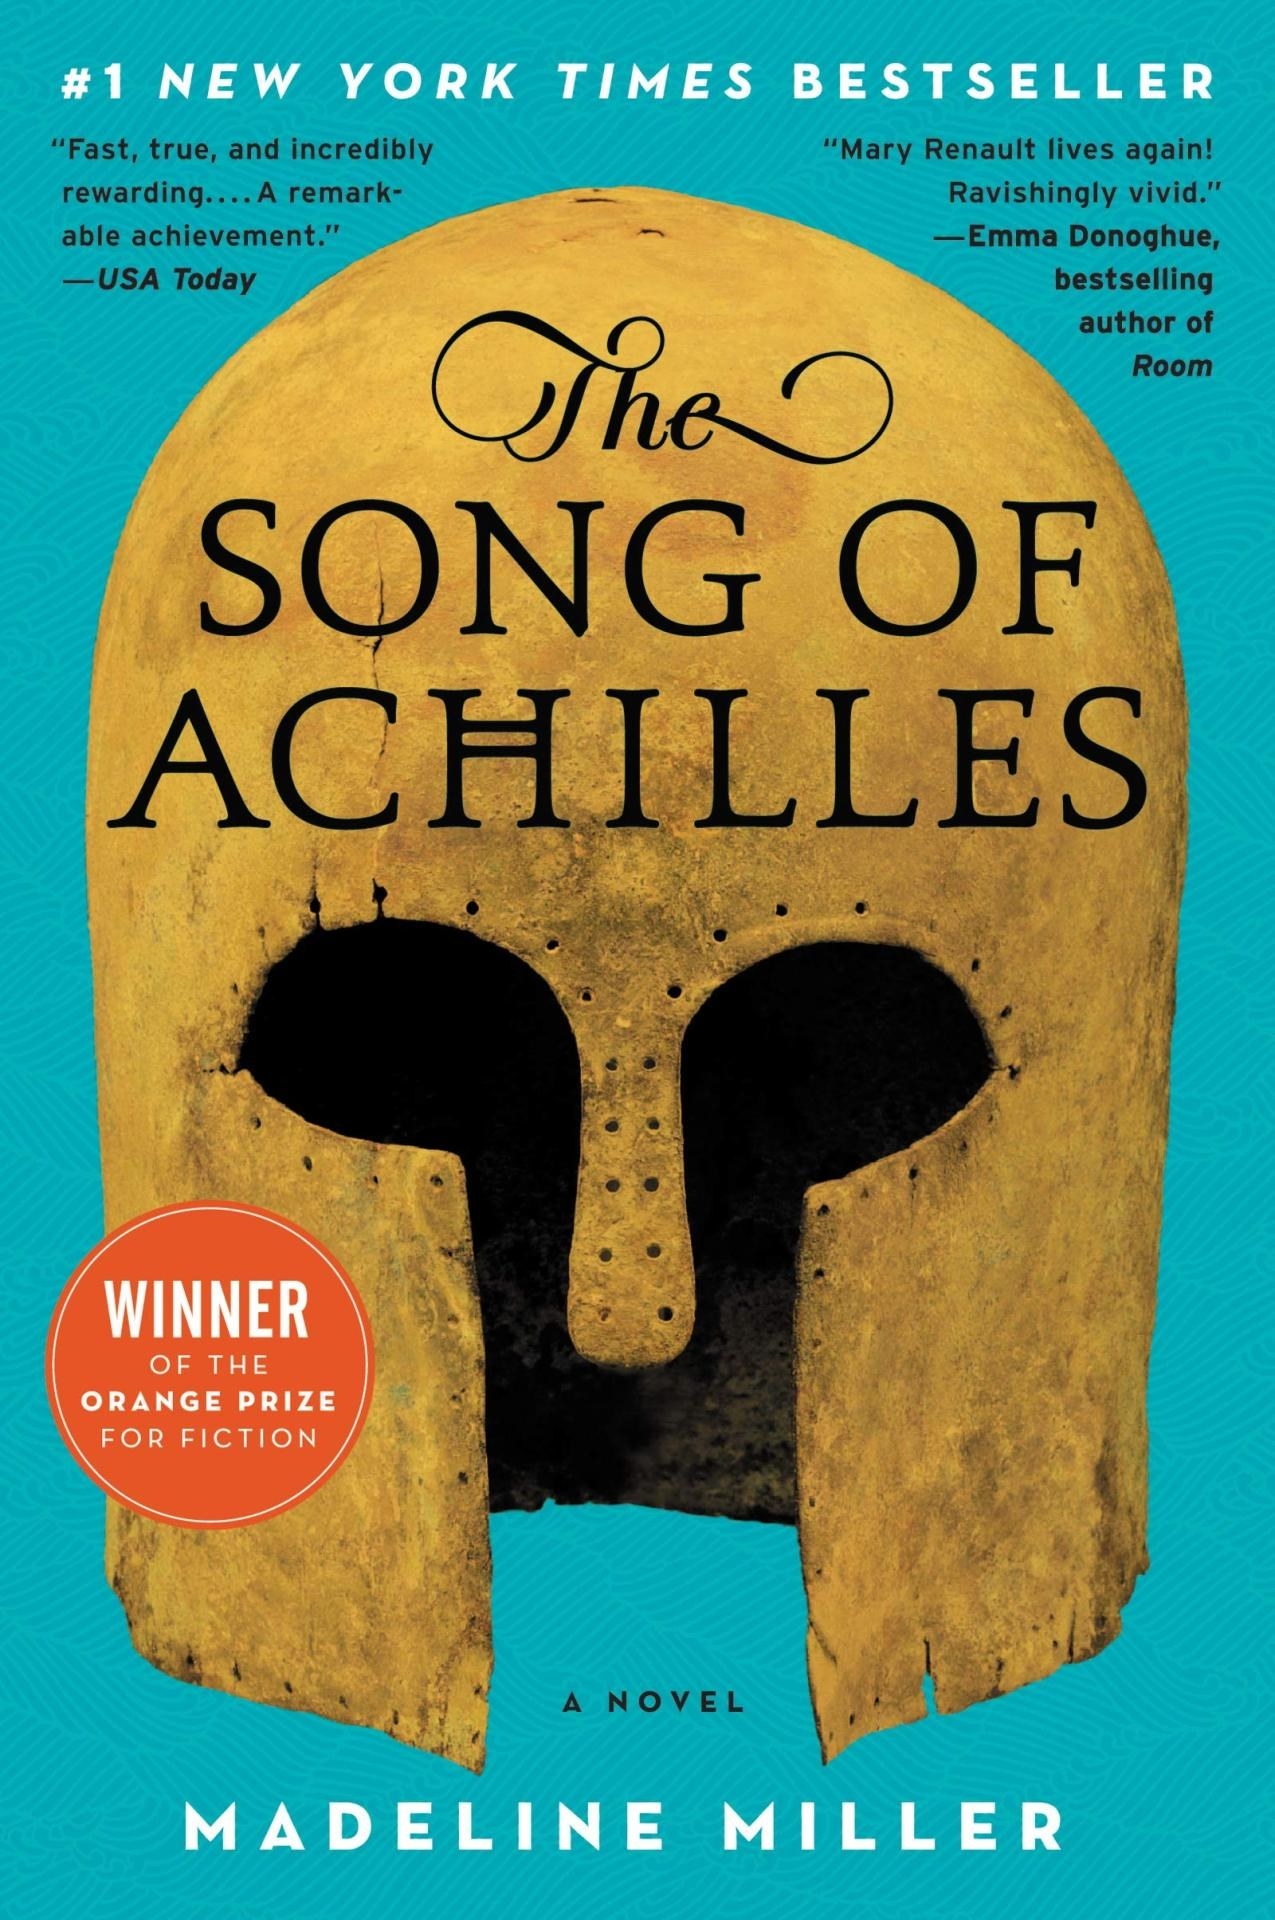 &quot;The Song of Achilles&quot; by Madeline Miller.